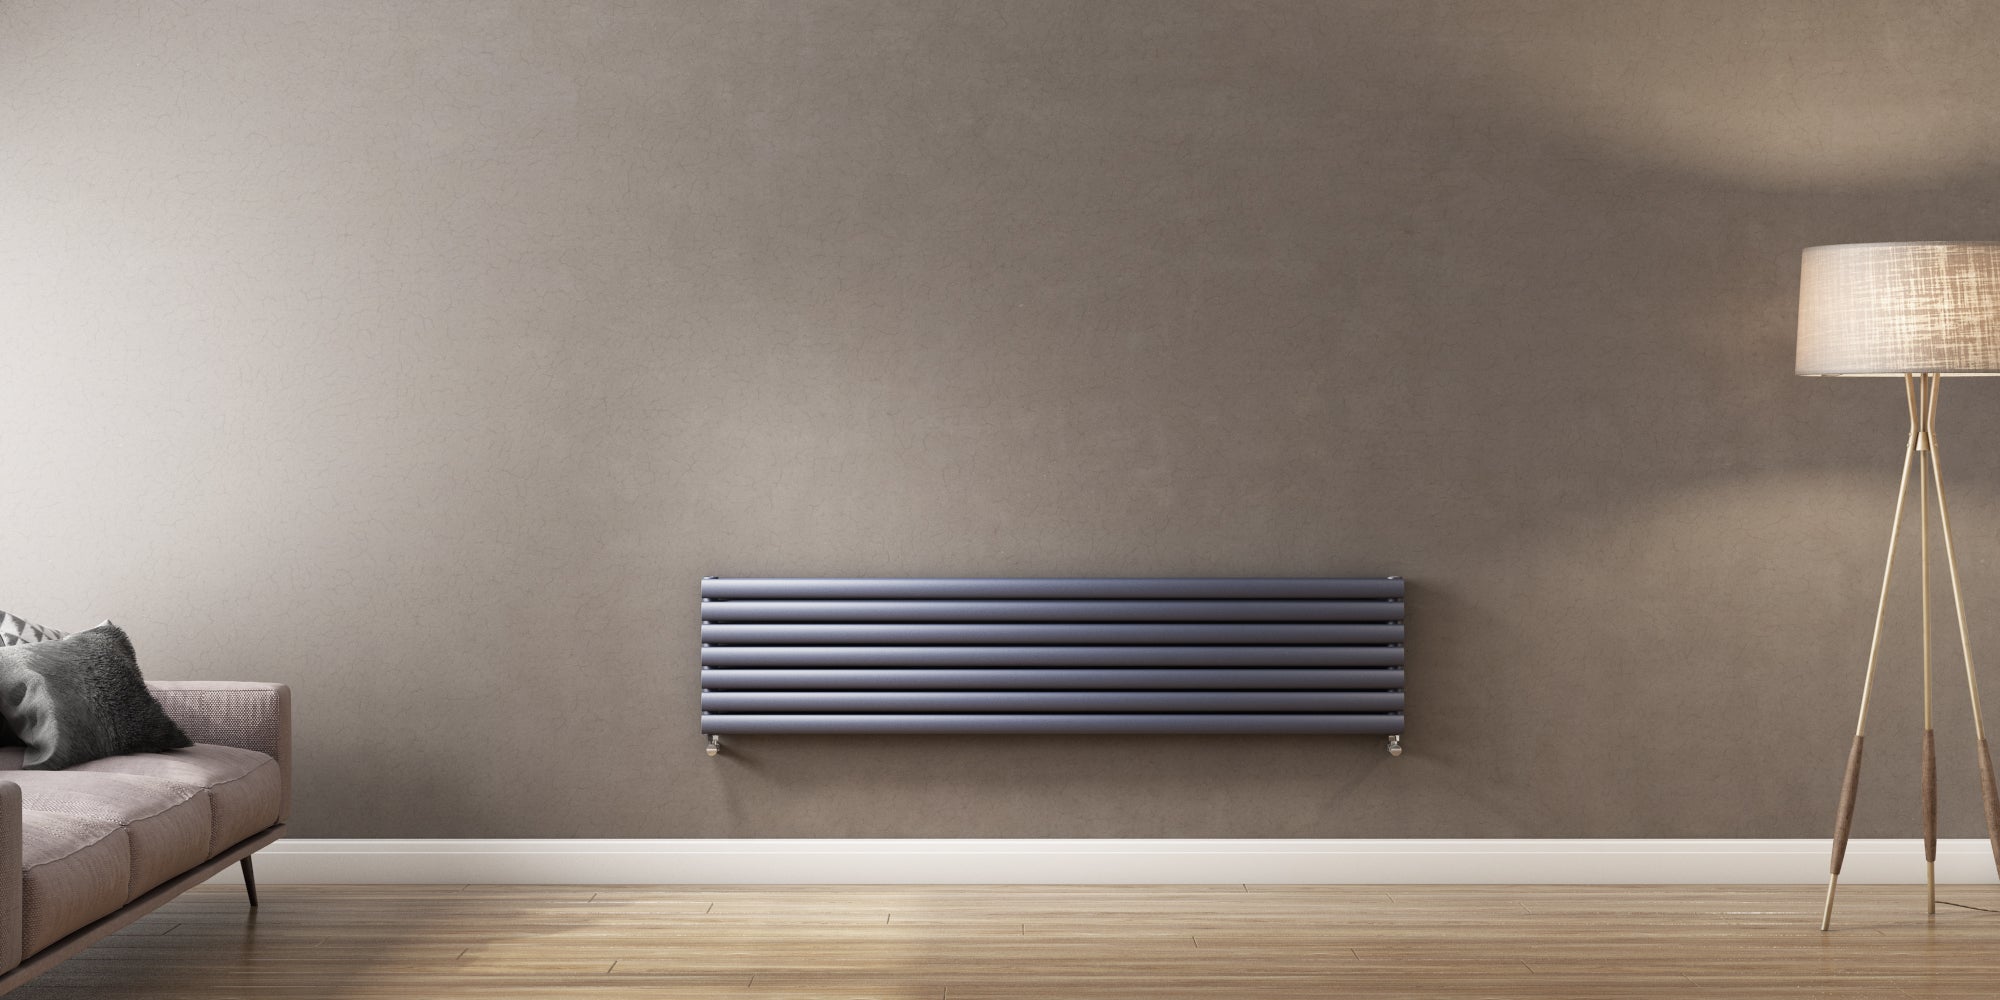 Why anthracite radiators are 2019's must have design feature